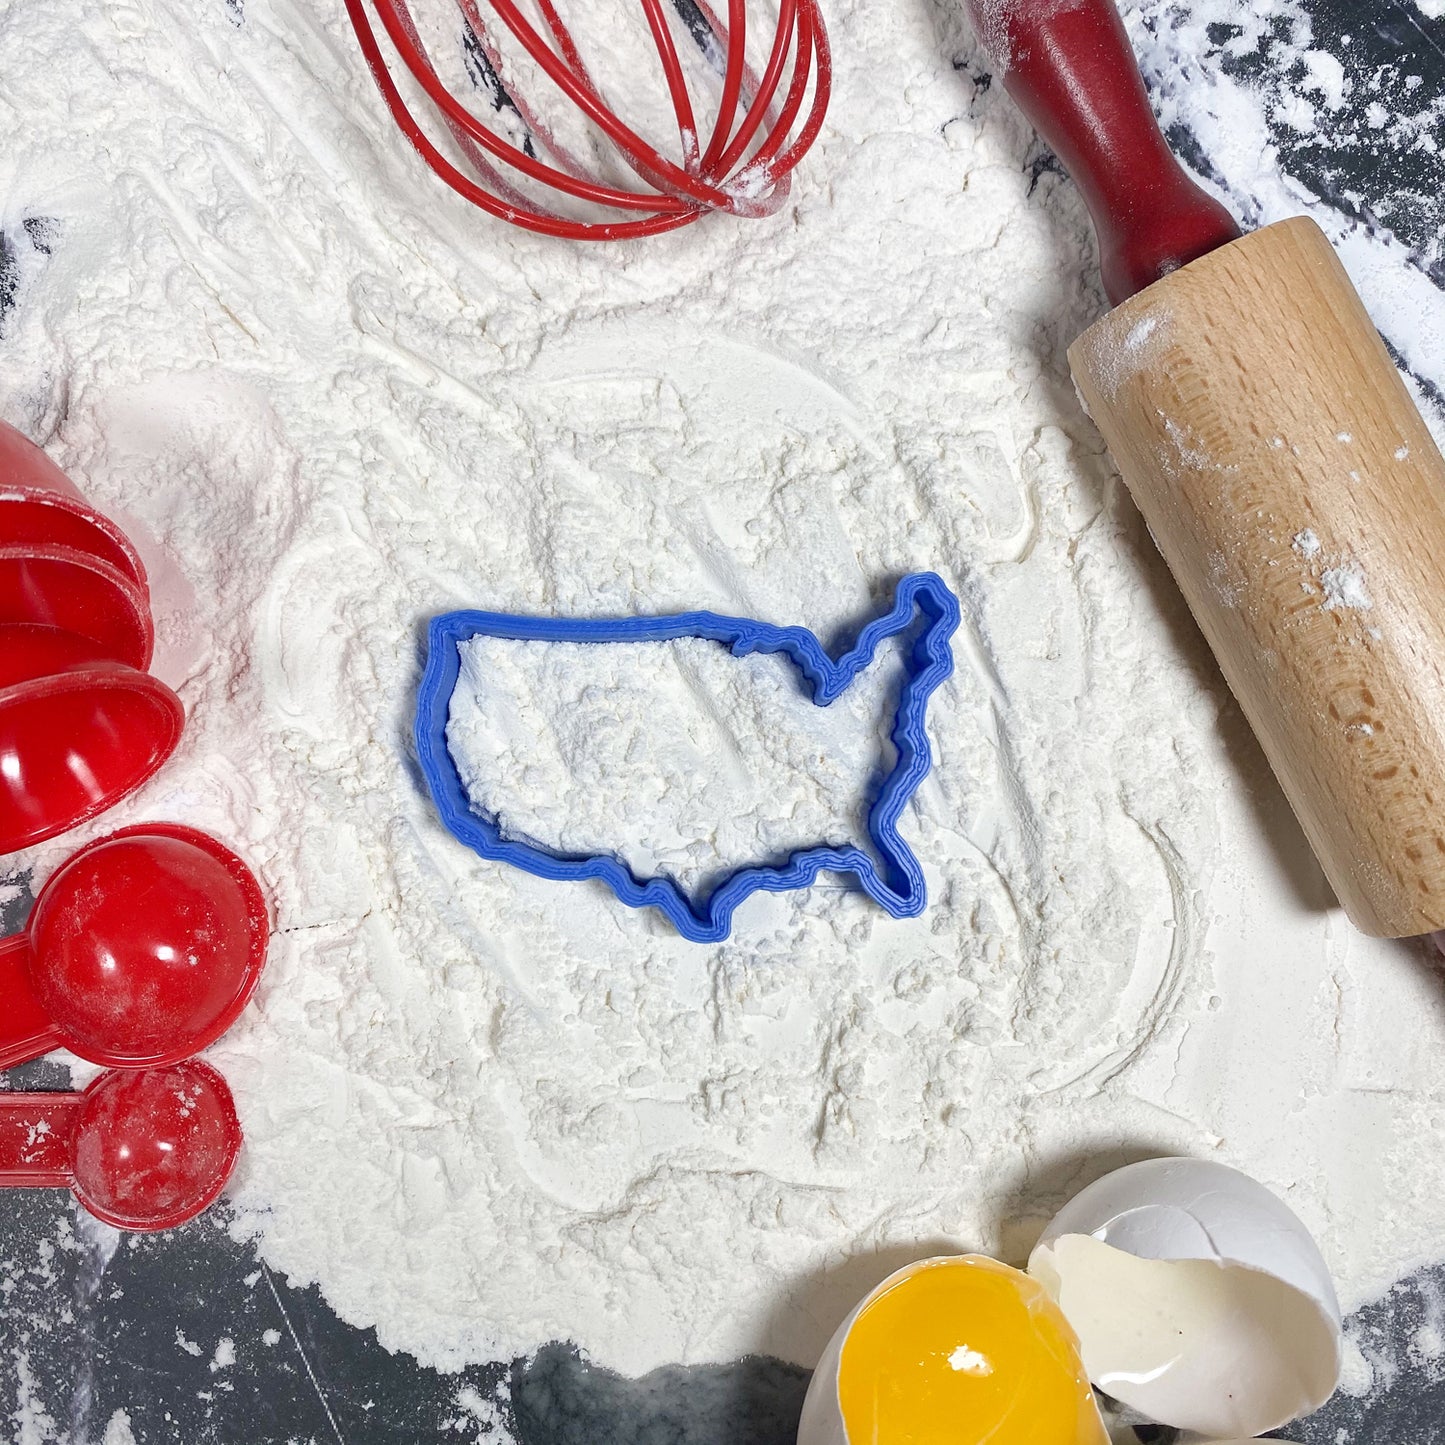 United States Of America USA Map Outline Special Occasion Cookie Cutter - USA Made